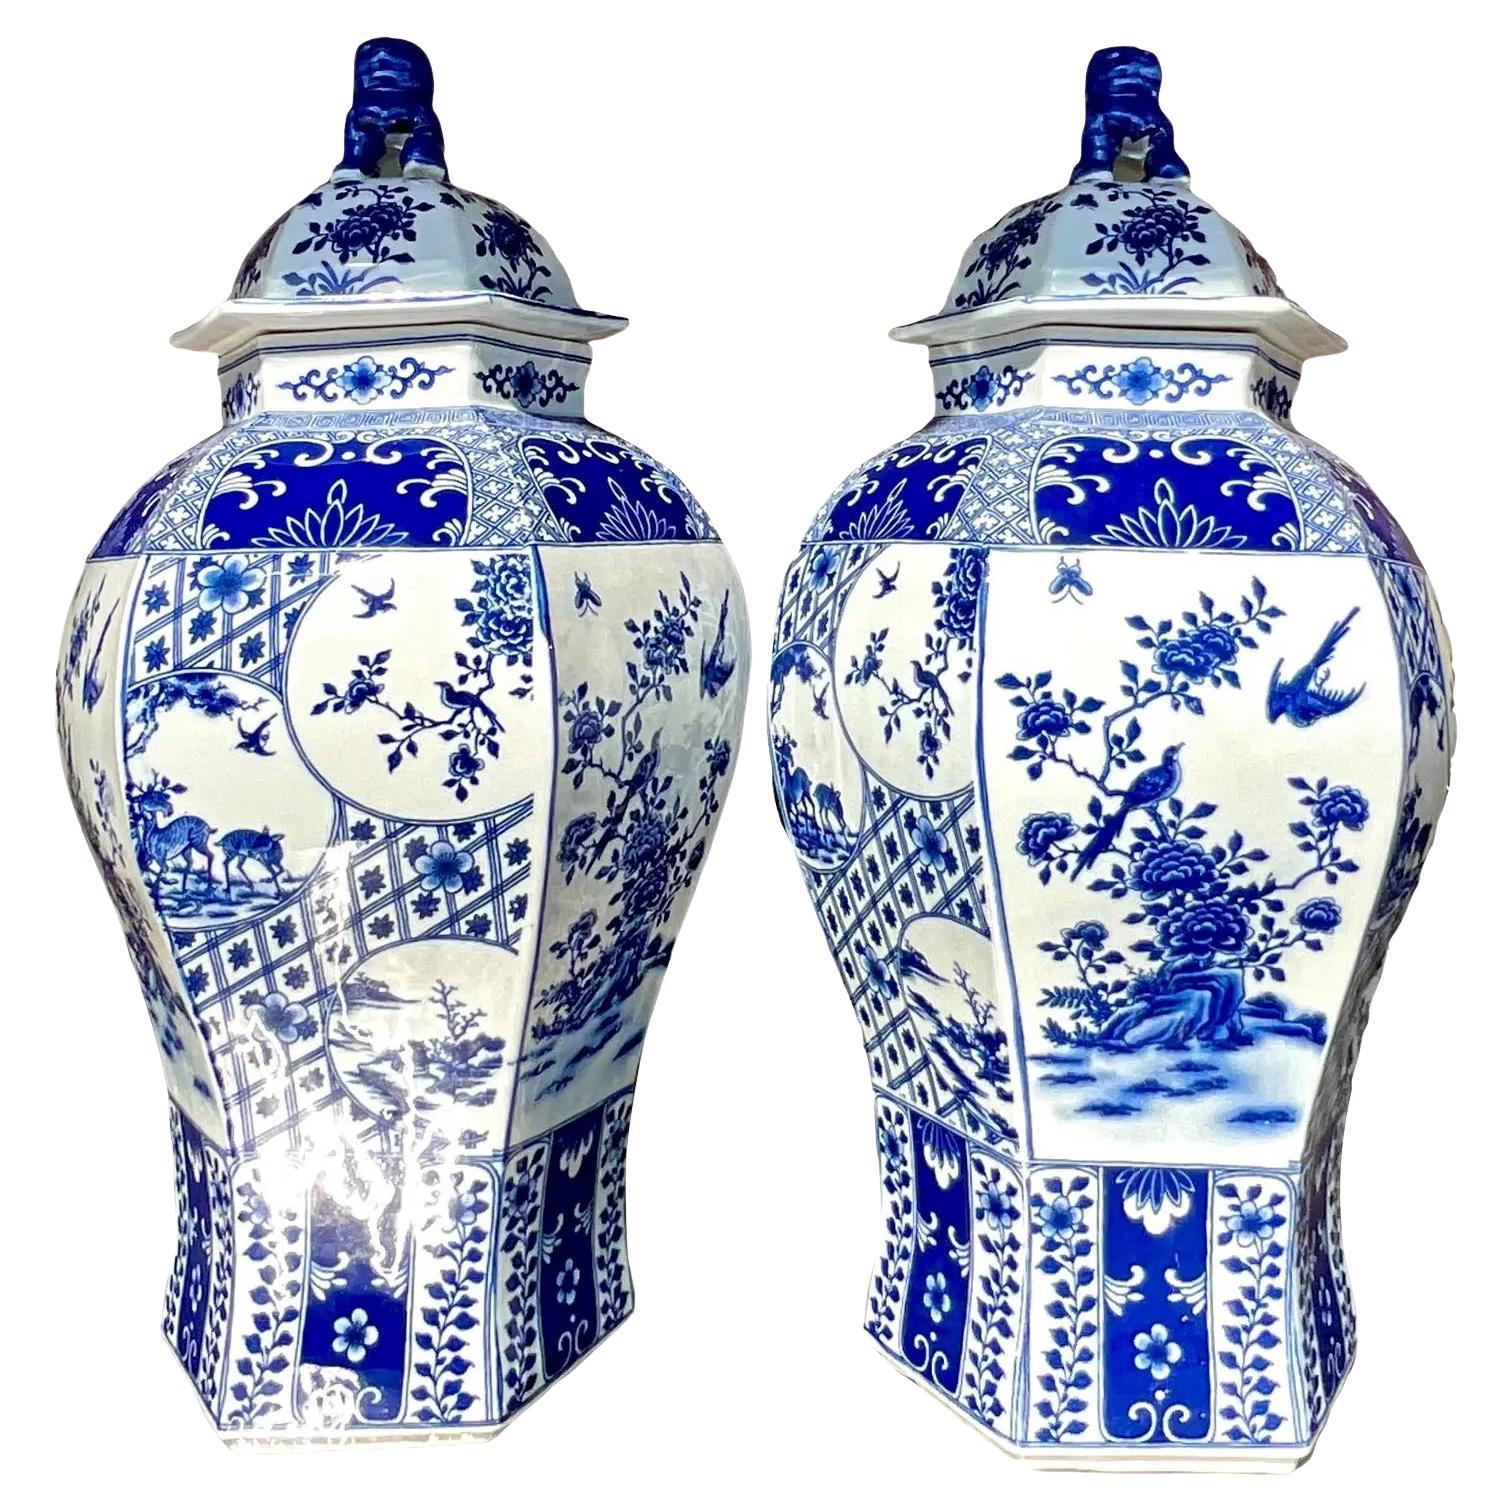 Vintage Asian Blue and White Urns - a Pair